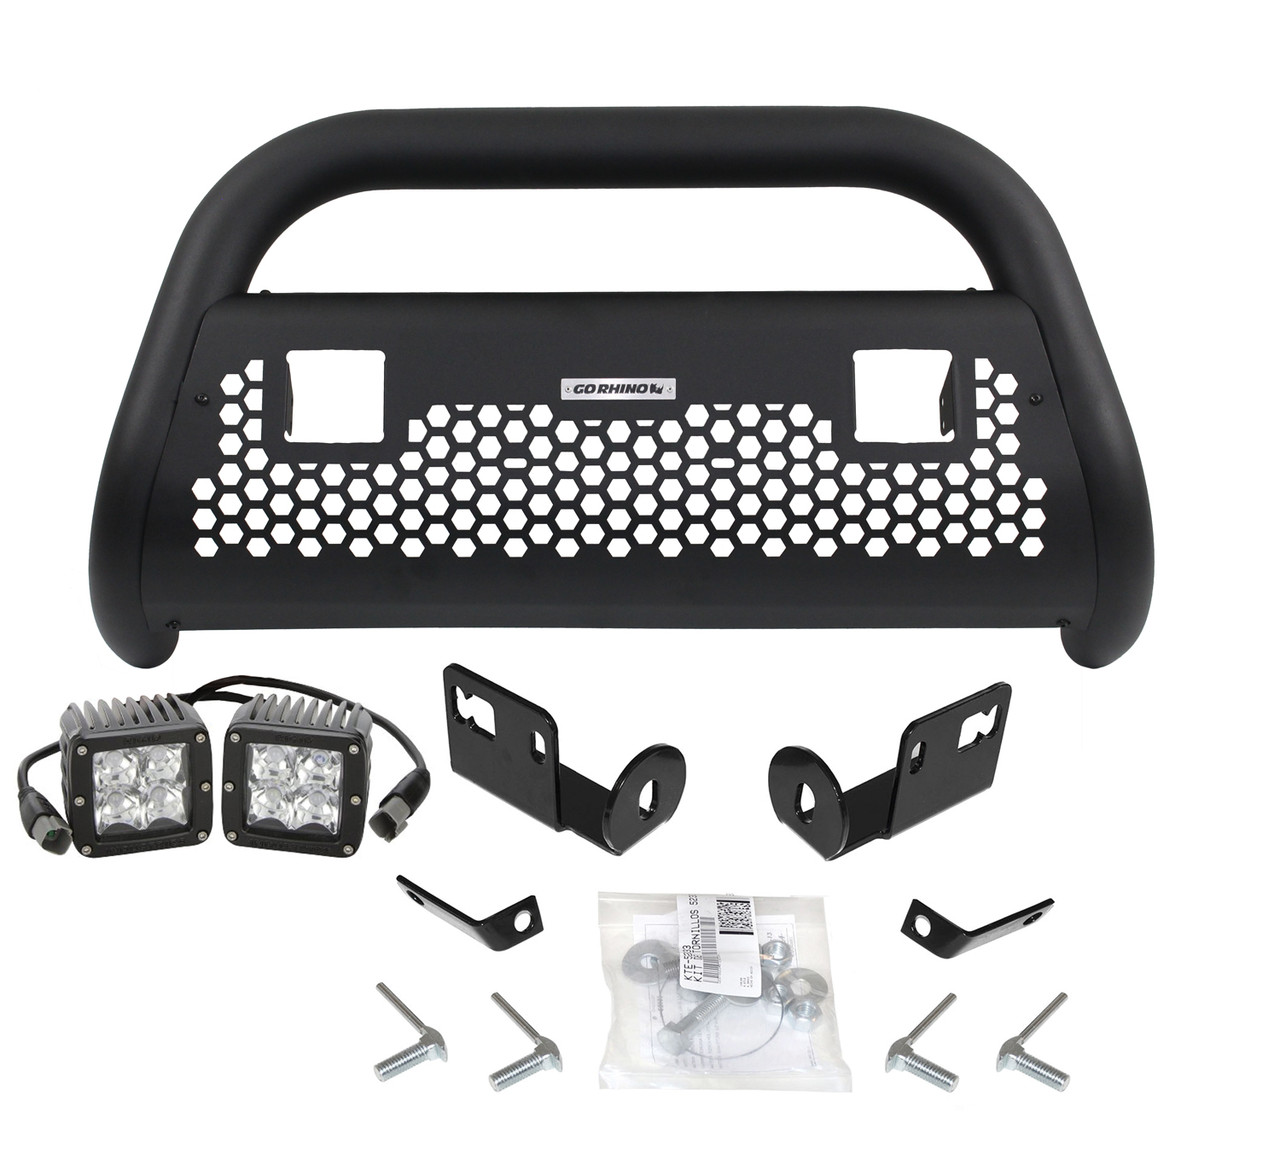 Go Rhino 5514211T GMC Canyon 2015-2020 RC2 LR- Complete kit: Bull Bar, Front Guard + Brackets +Lights, Black Textured Mild Steel (Lights Included) Installation Kit Included